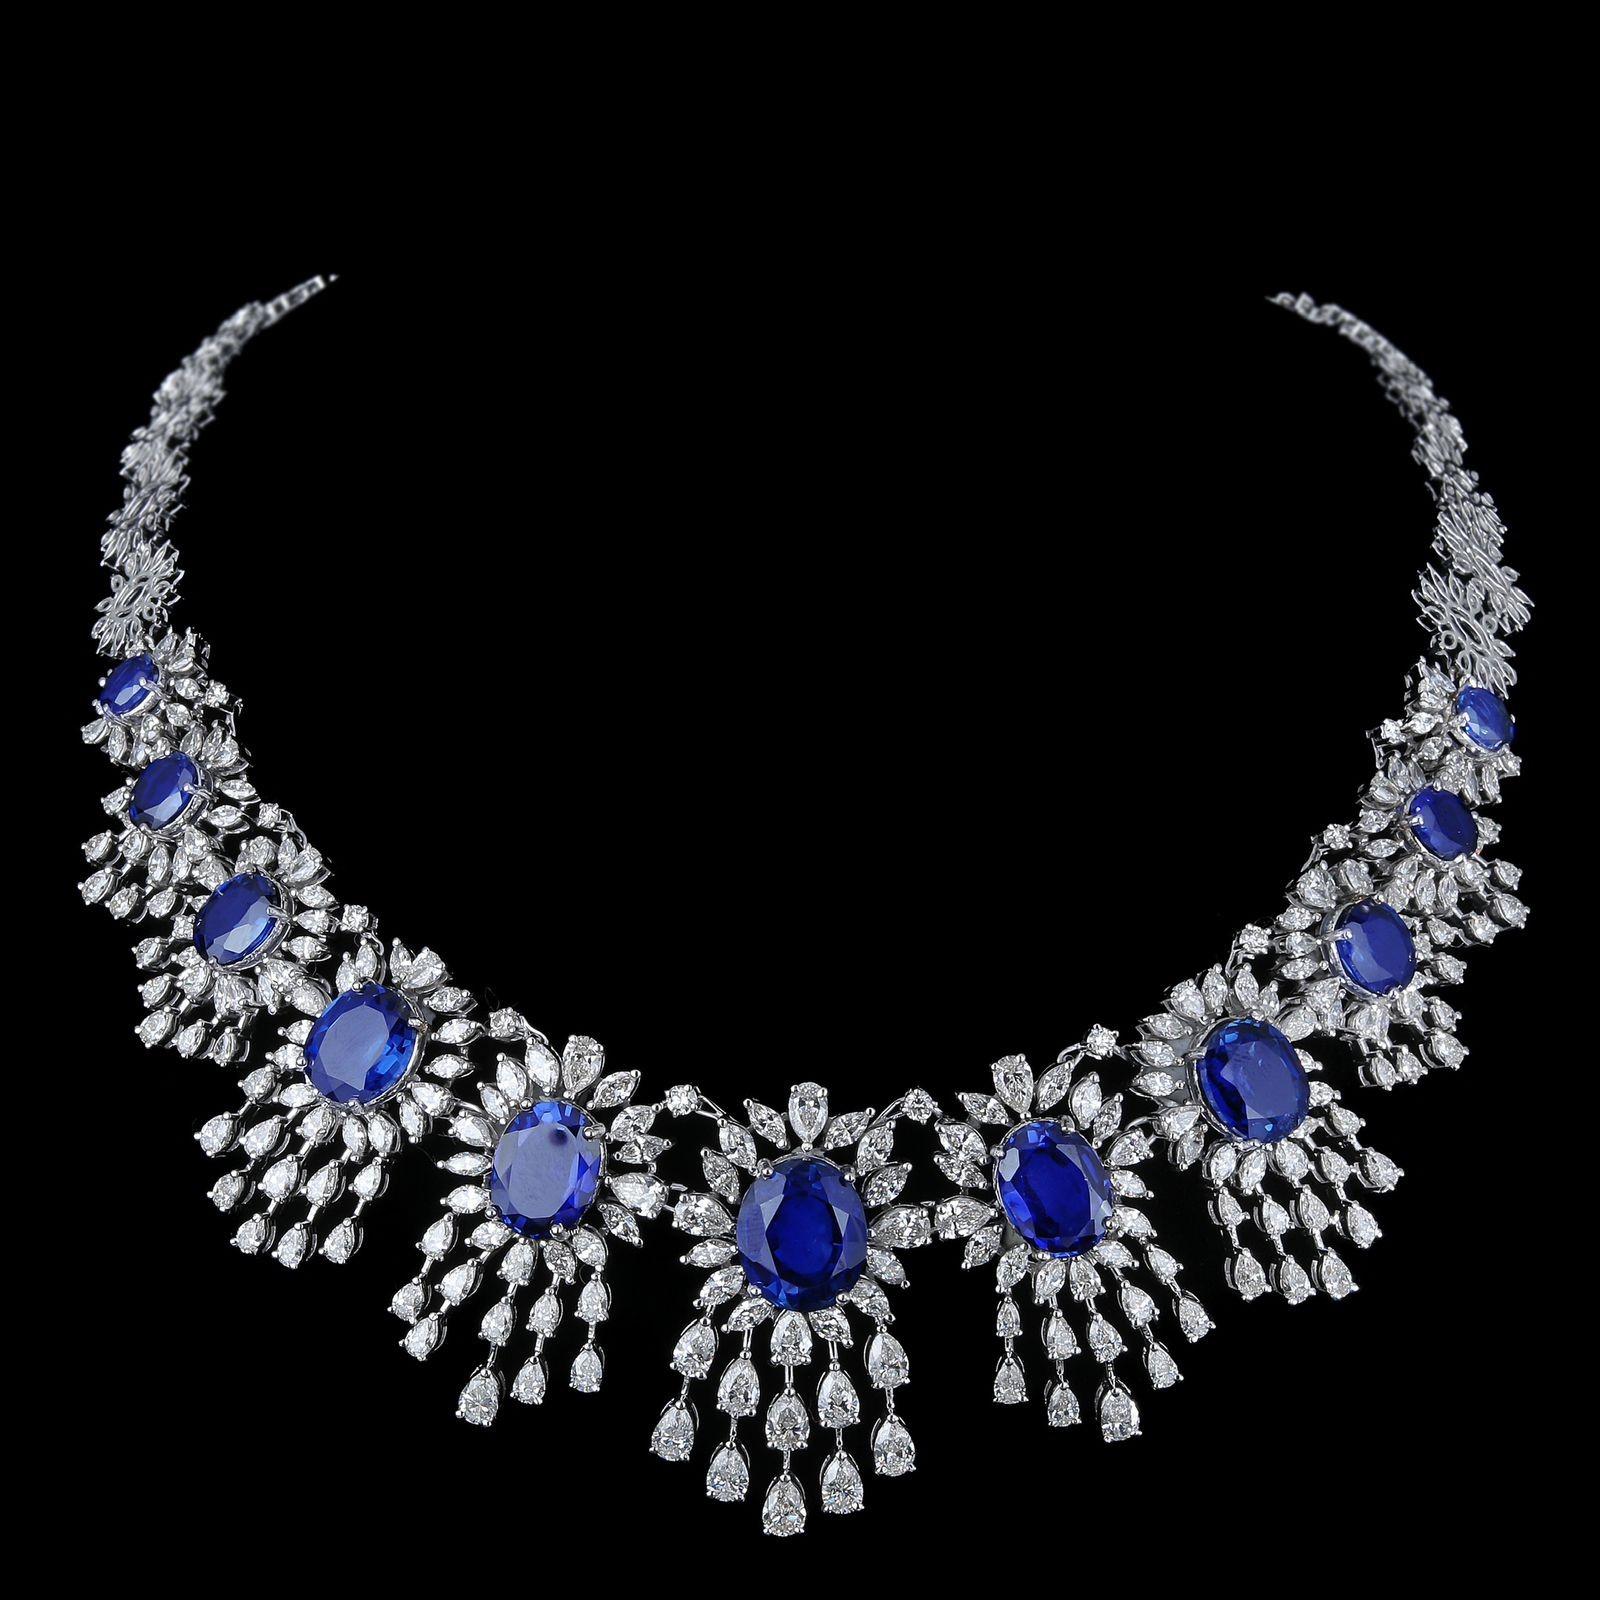 The Following Item we are offering is a Rare Important Spectacular and Brilliant White Gold Large Gorgeous Fancy Blue Sapphire Diamond Draped Necklace. Necklace consists of Rare Fine Magnificent Glittering Blue Sapphires and Gorgeous Diamonds!